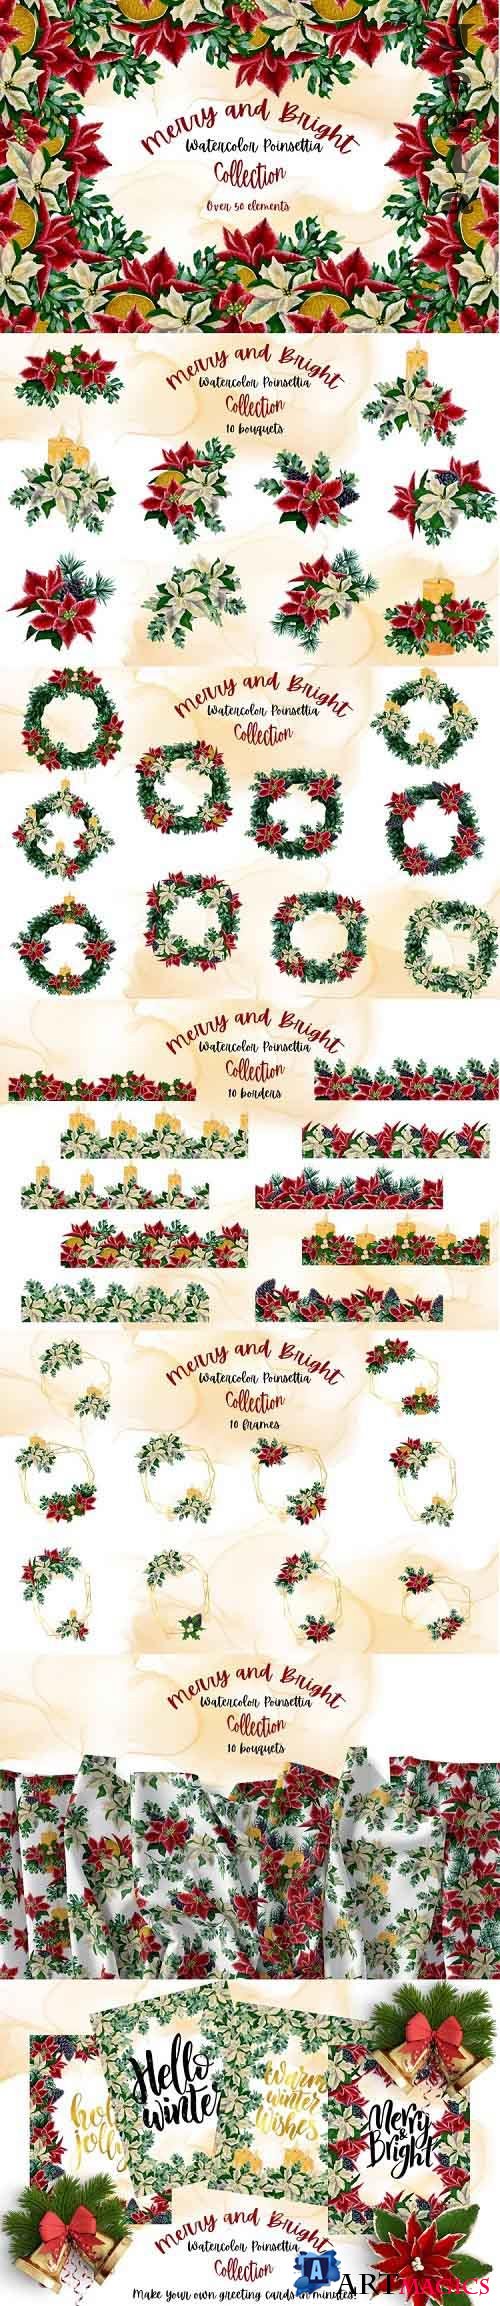 Merry and Bright - Watercolor Poinsettia Collection - 1014543